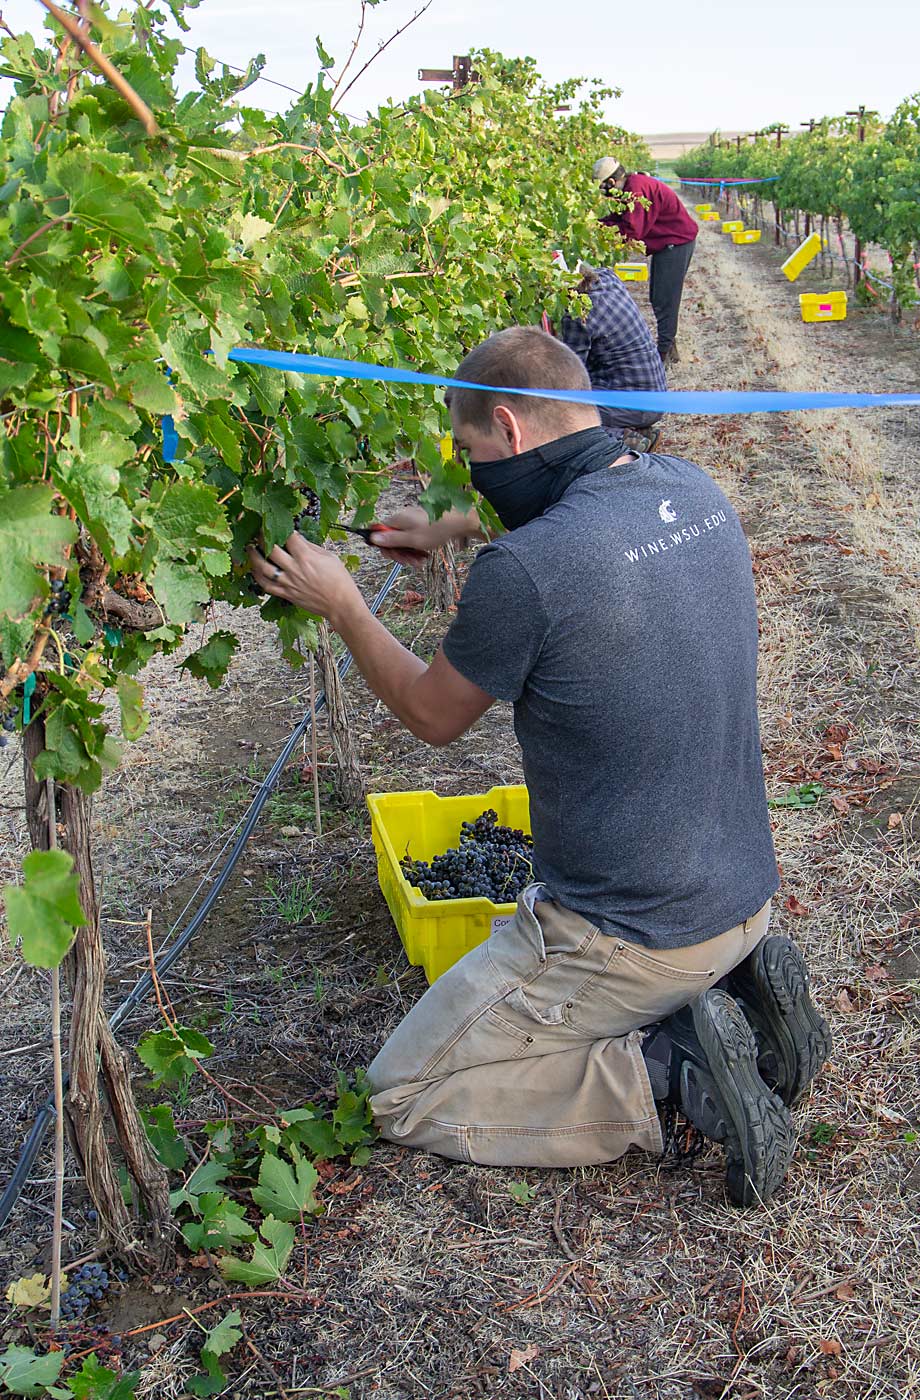 Washington State University staff and students collect samples in a Cabernet Sauvignon block where barrier sprays were applied to the vines before a smoke event on Oct. 12, 2020, in a Prosser research vineyard. (Kate Prengaman/Good Fruit Grower)